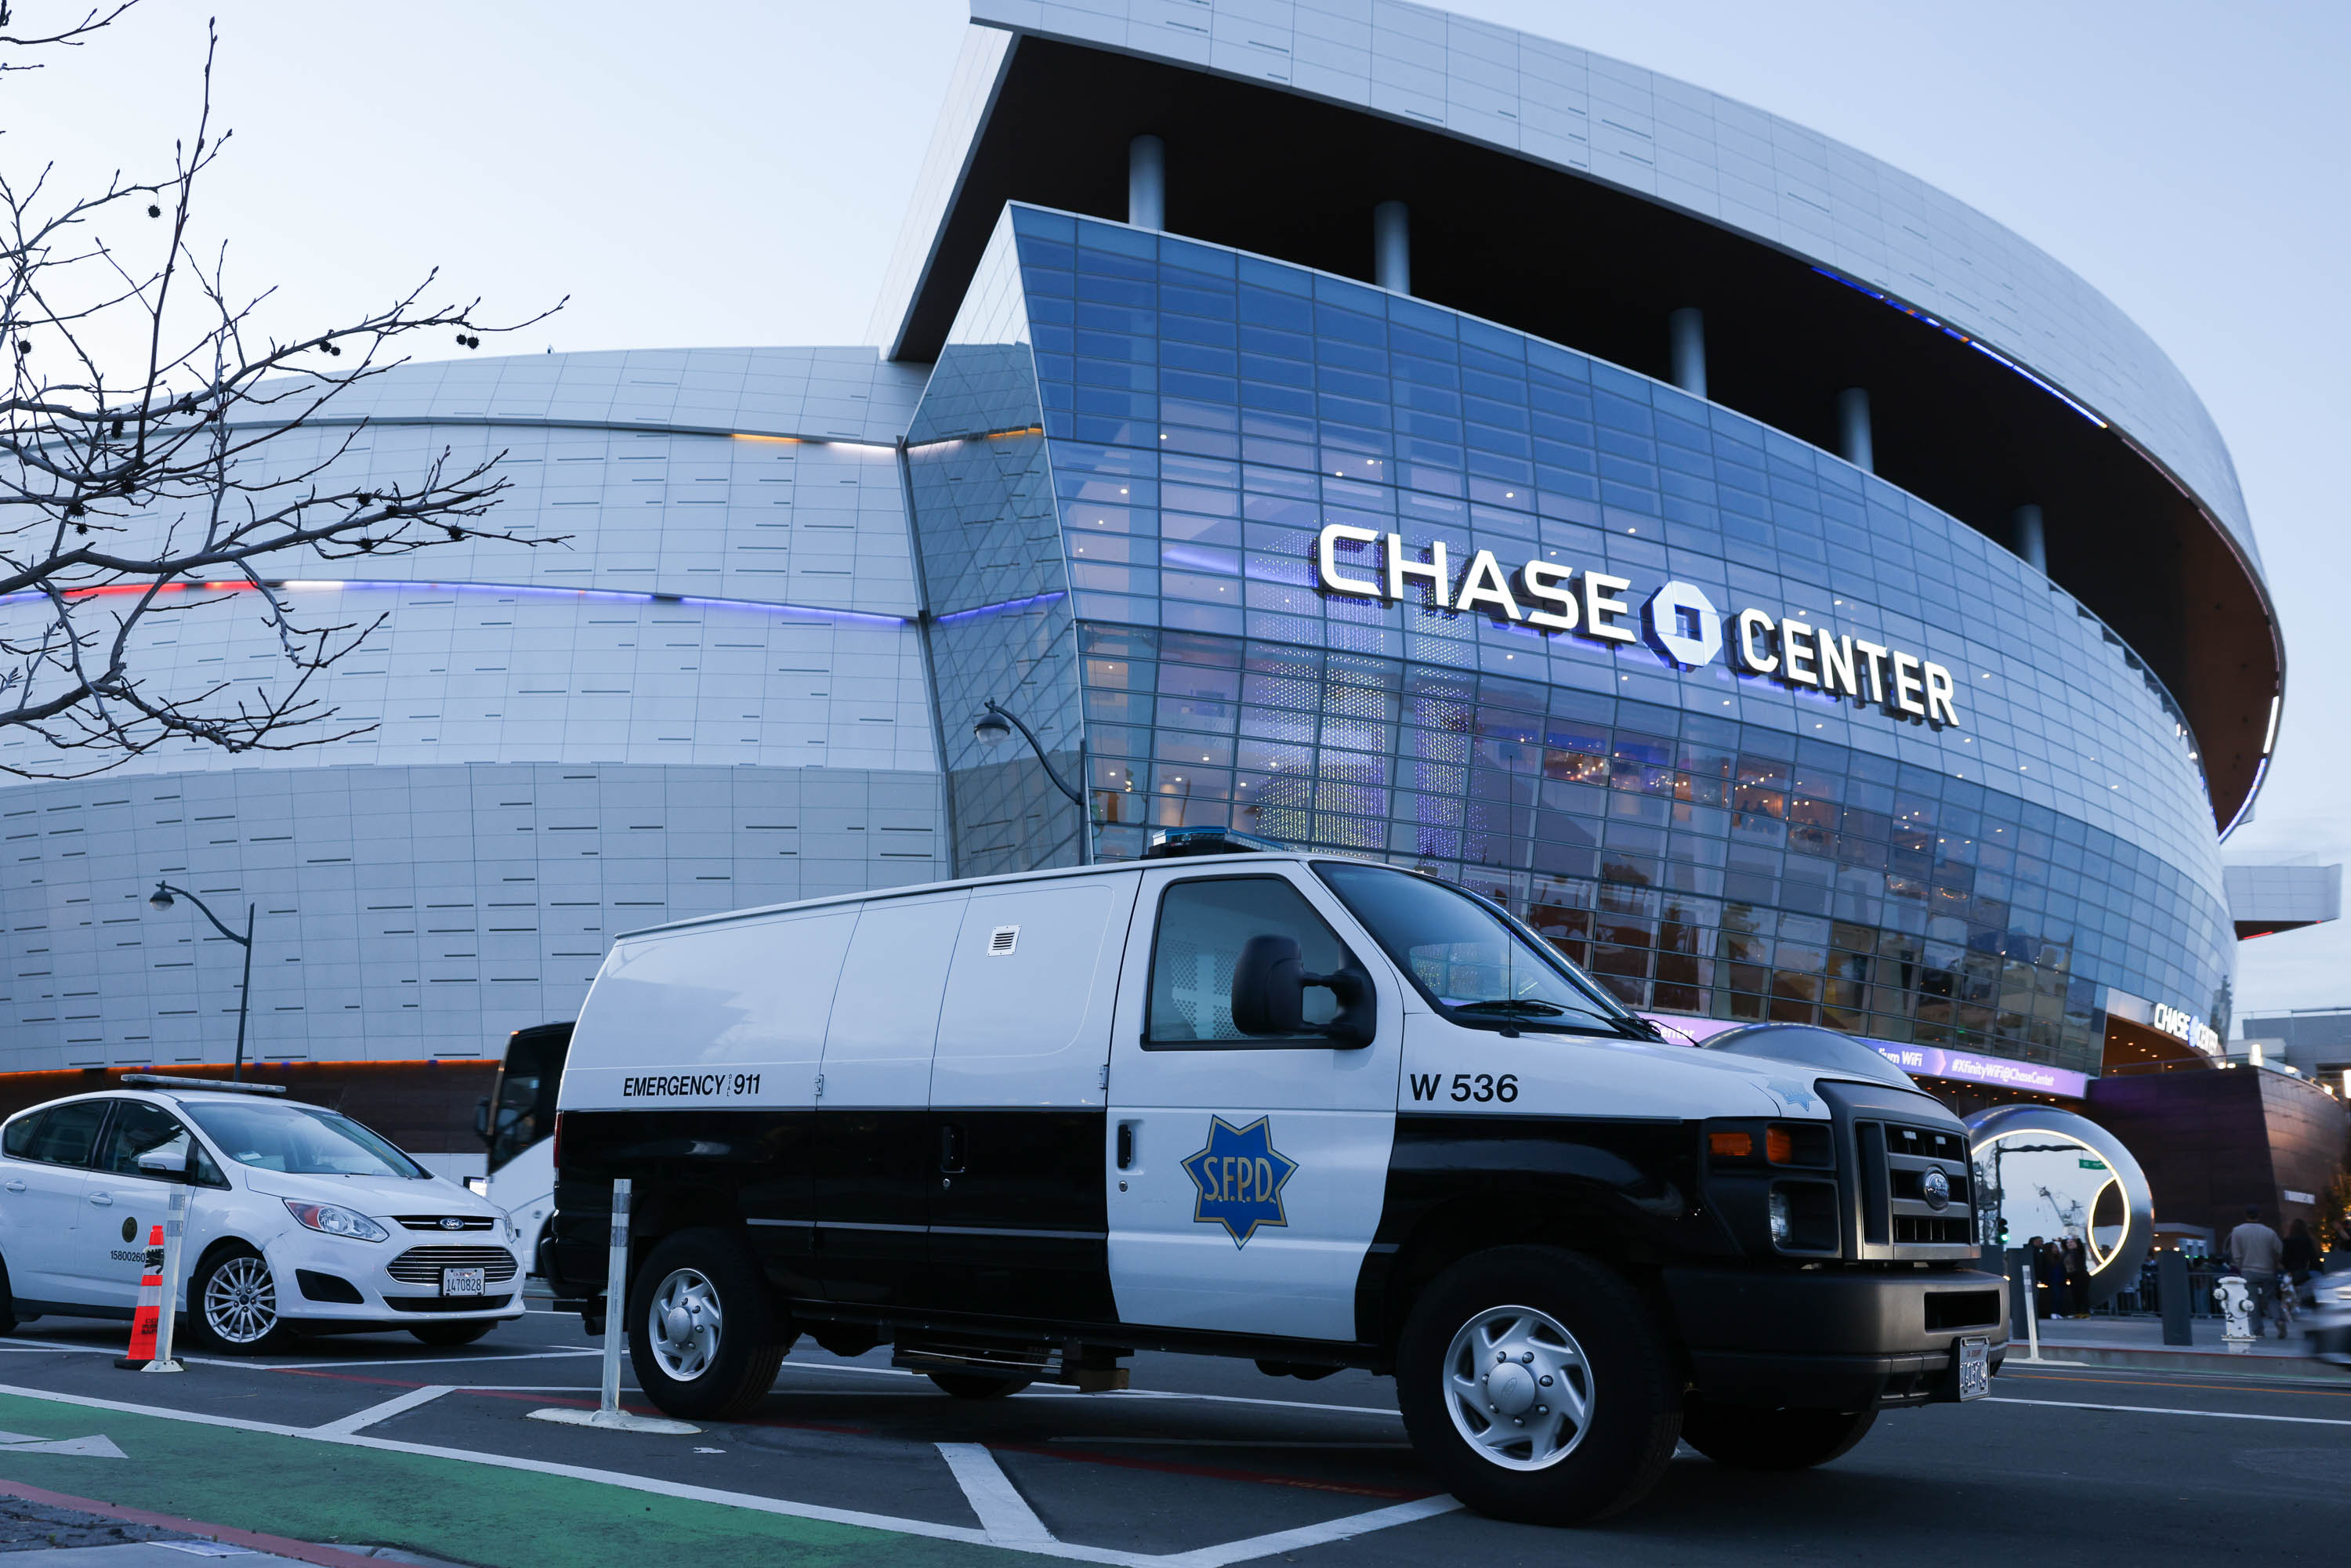 A van labeled &quot;EMERGENCY 911&quot; parks near the illuminated Chase Center arena during dusk.